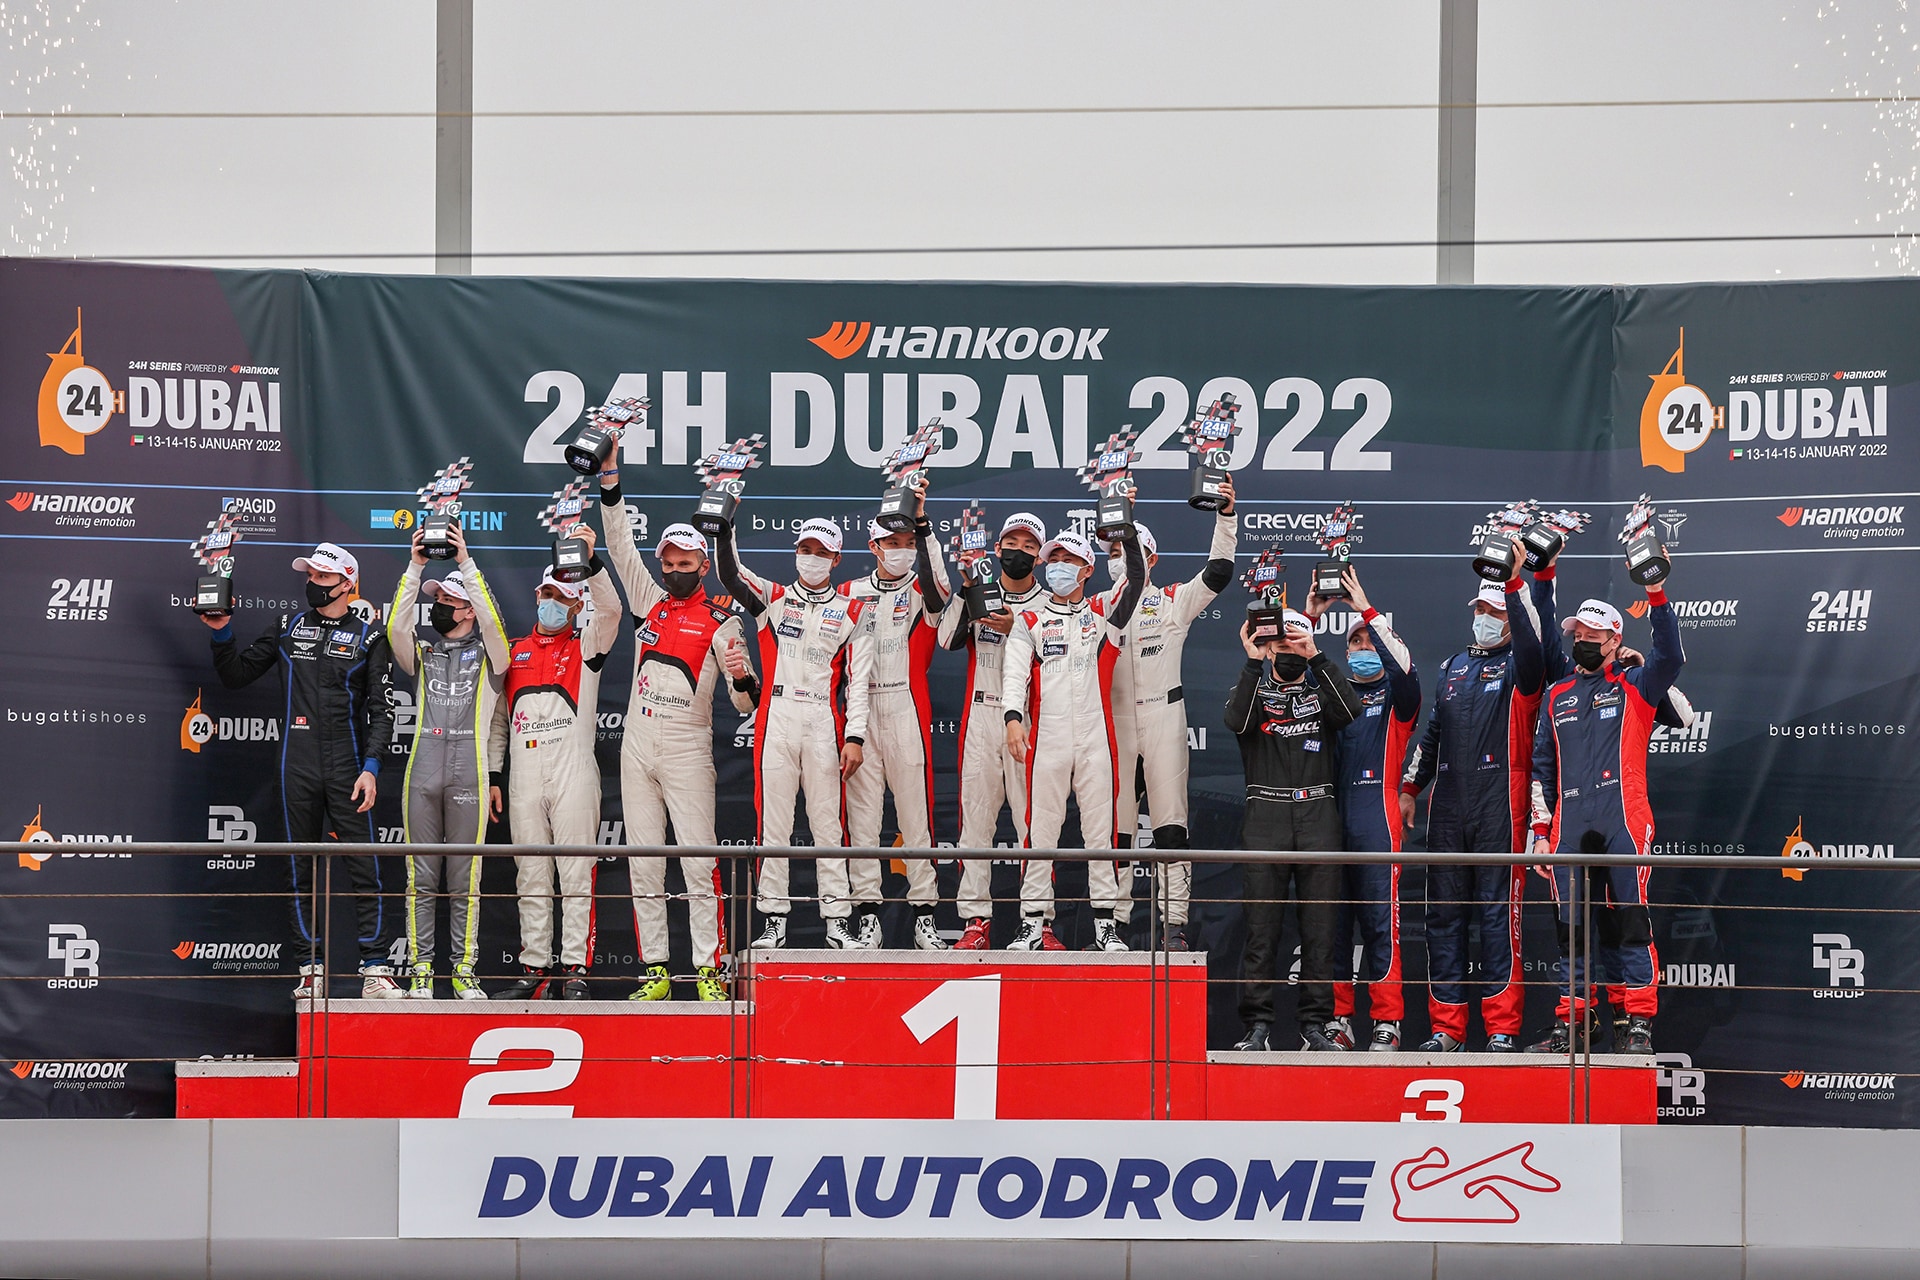 Hankook Tire & Technology-Technology in Motion-Dubai 24 Hour Race, A dash to the finish-7